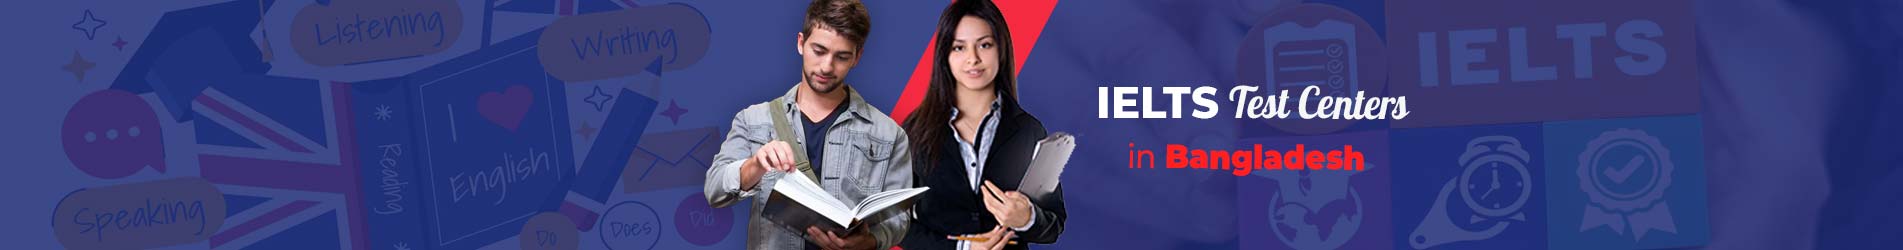 IELTS Test Centers in Bangladesh